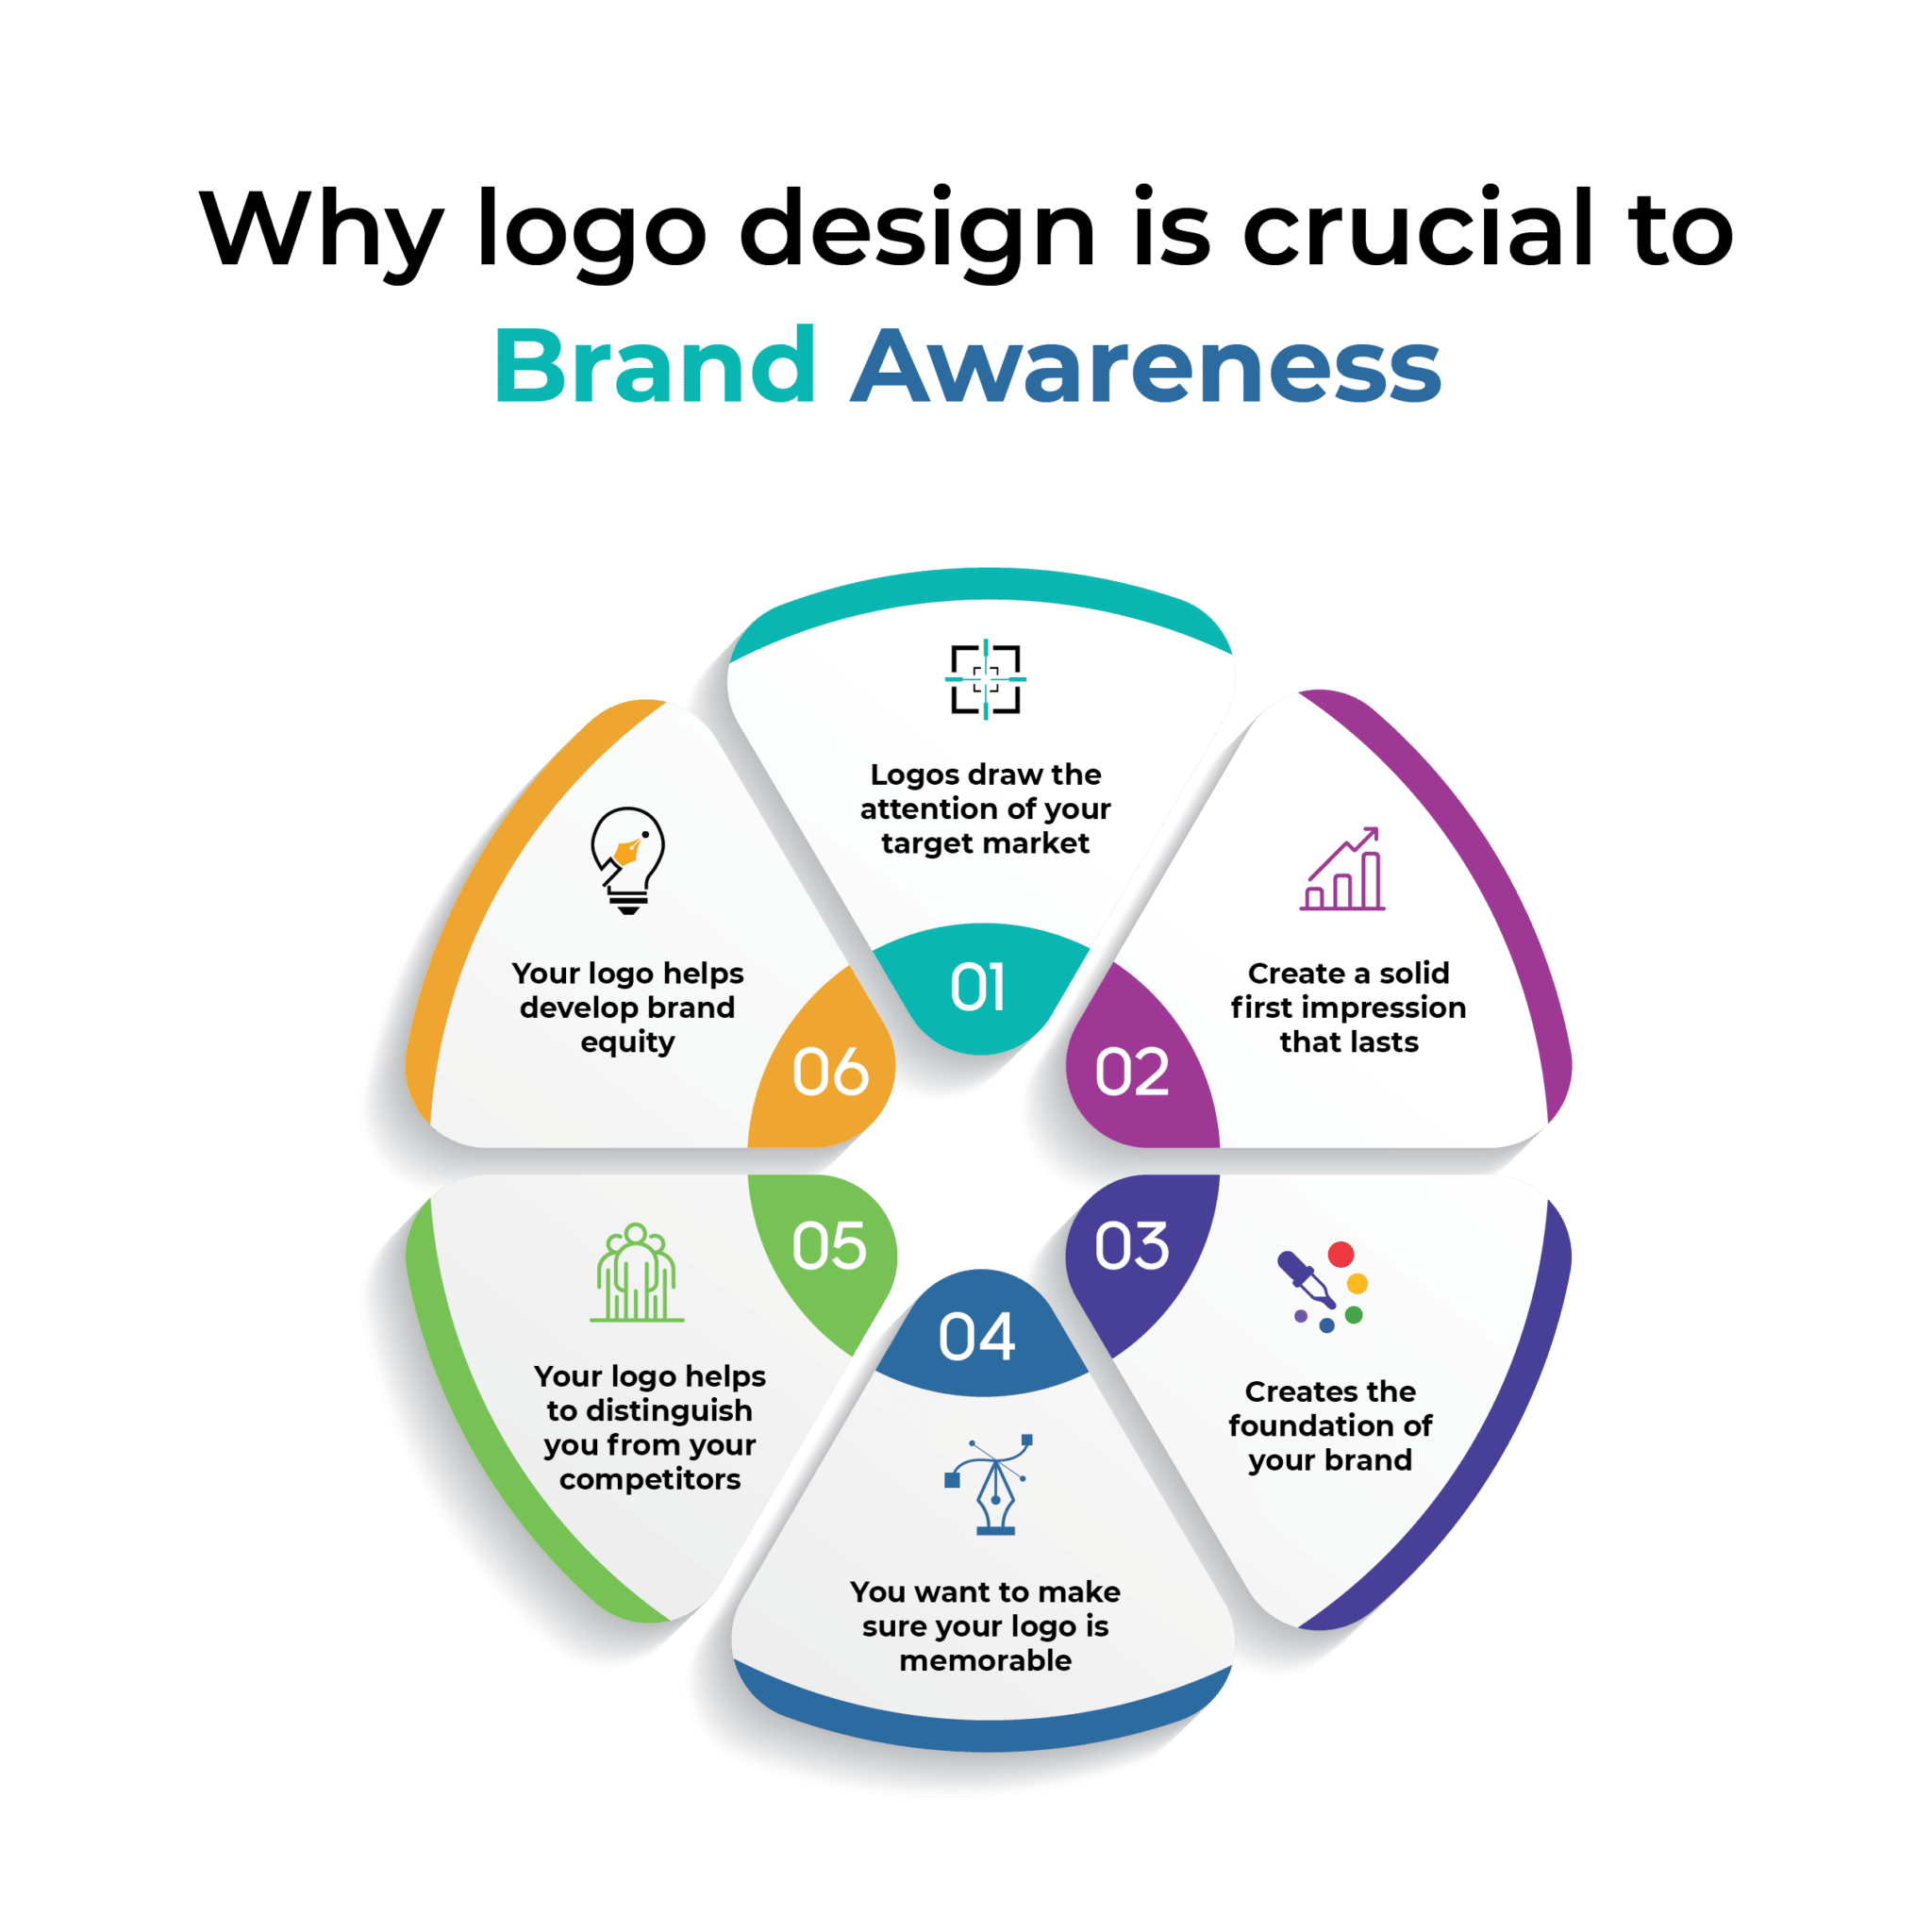 Why logo design is crucial to brand awareness